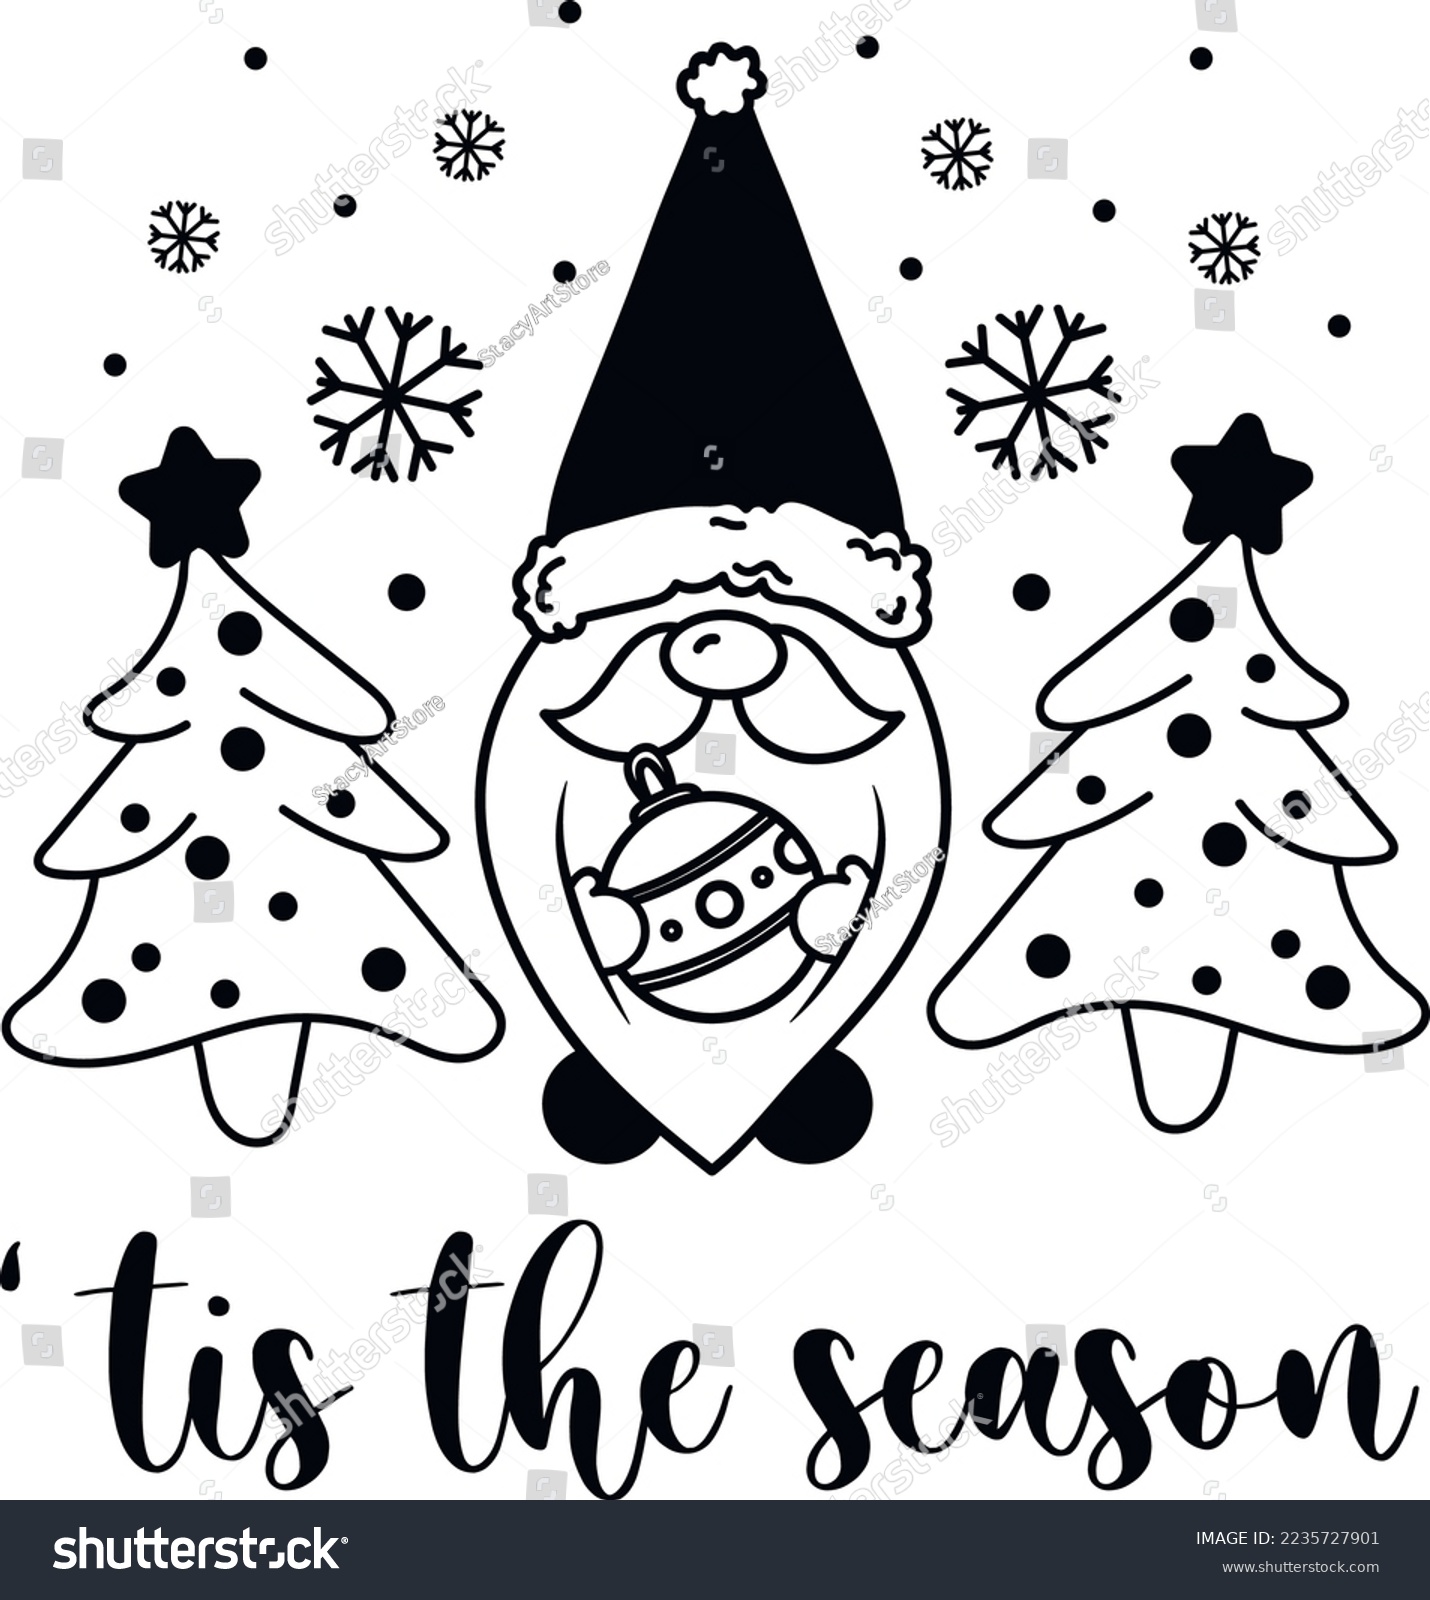 SVG of Hand Drawn Vector Christmas Gnome SVG Illustration Set Isolated on White. Tis The Season Quote Composition Perfect for Cut Designs, Cutting Boards, T-shirt, Printing, Greetings and Craft Designs svg